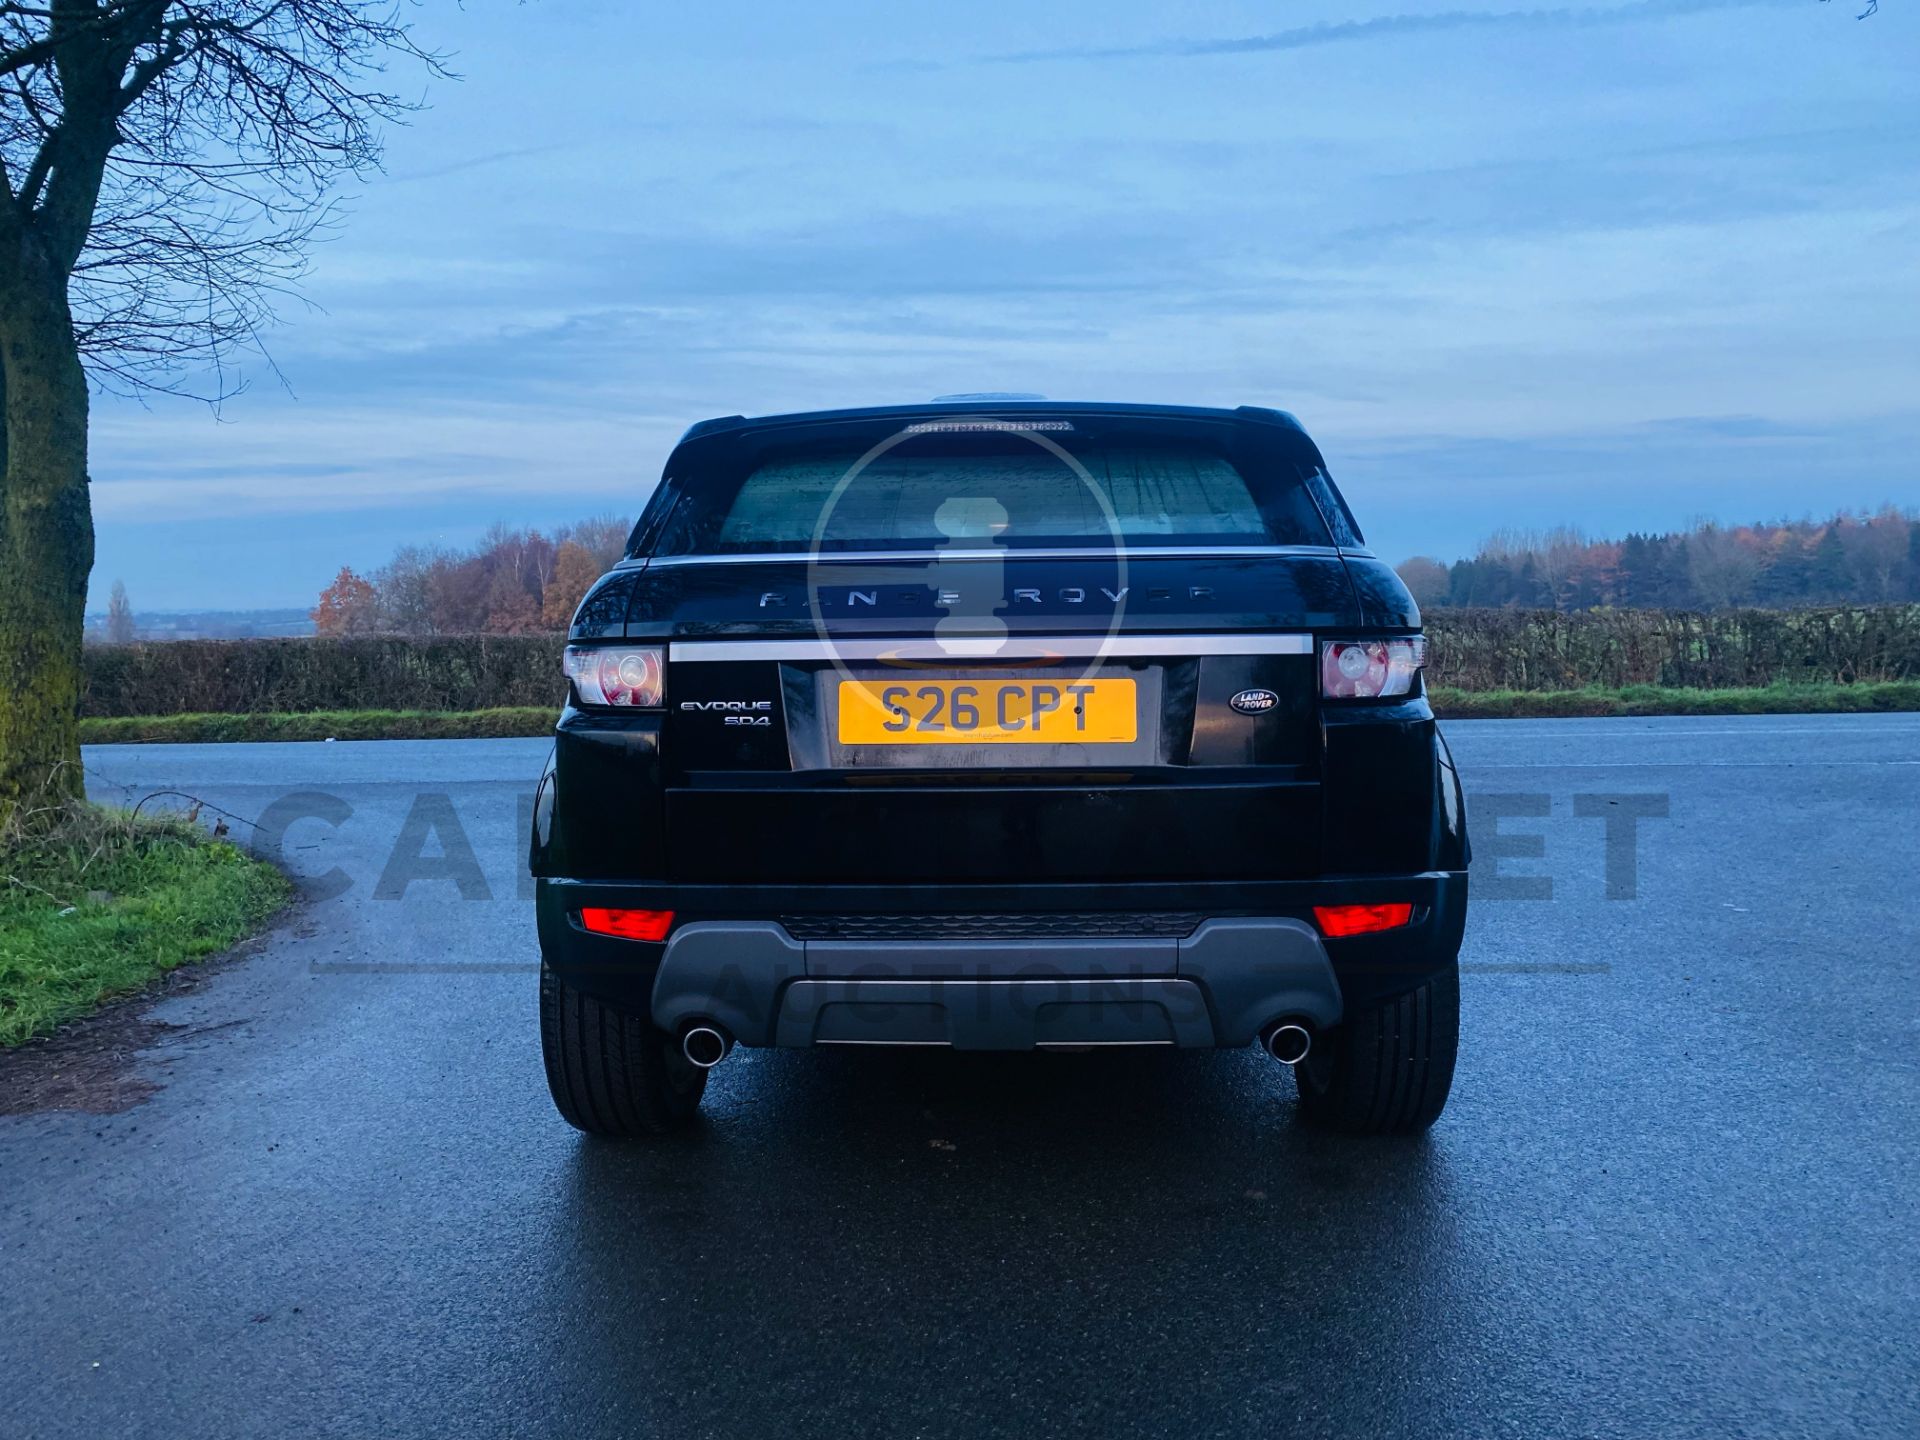 (On Sale) LAND ROVER EVOQUE PRESTIGE 2.2 STOP/START 4WD AUTO MATIC SATNAV AIRCON AND PANORAMIC ROF - Image 8 of 29